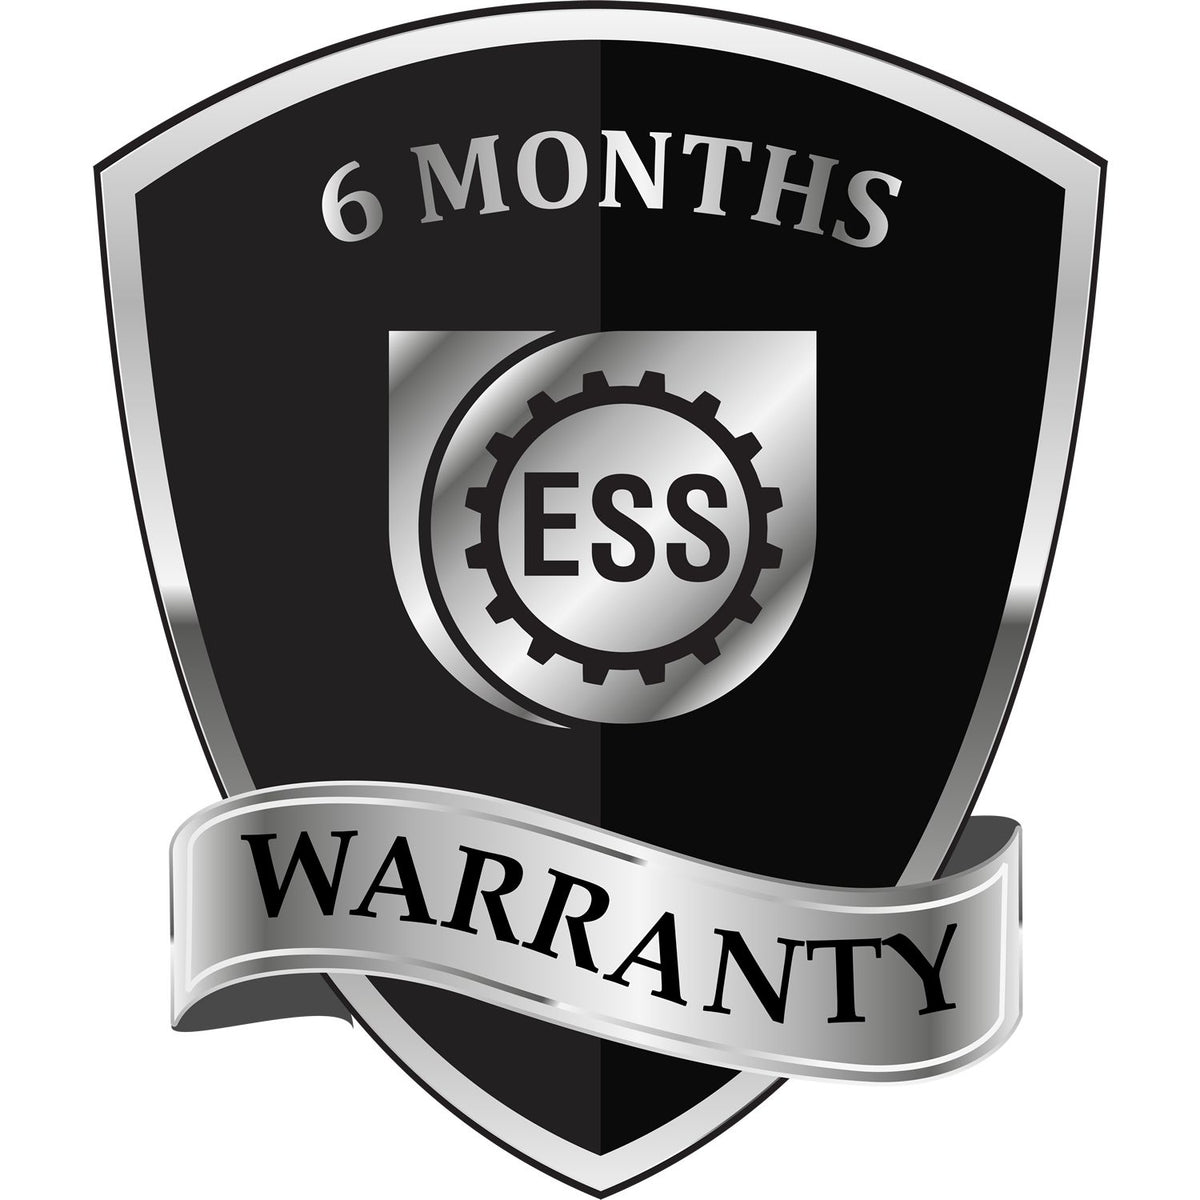 A badge or emblem showing a warranty icon for the Self-Inking Louisiana PE Stamp